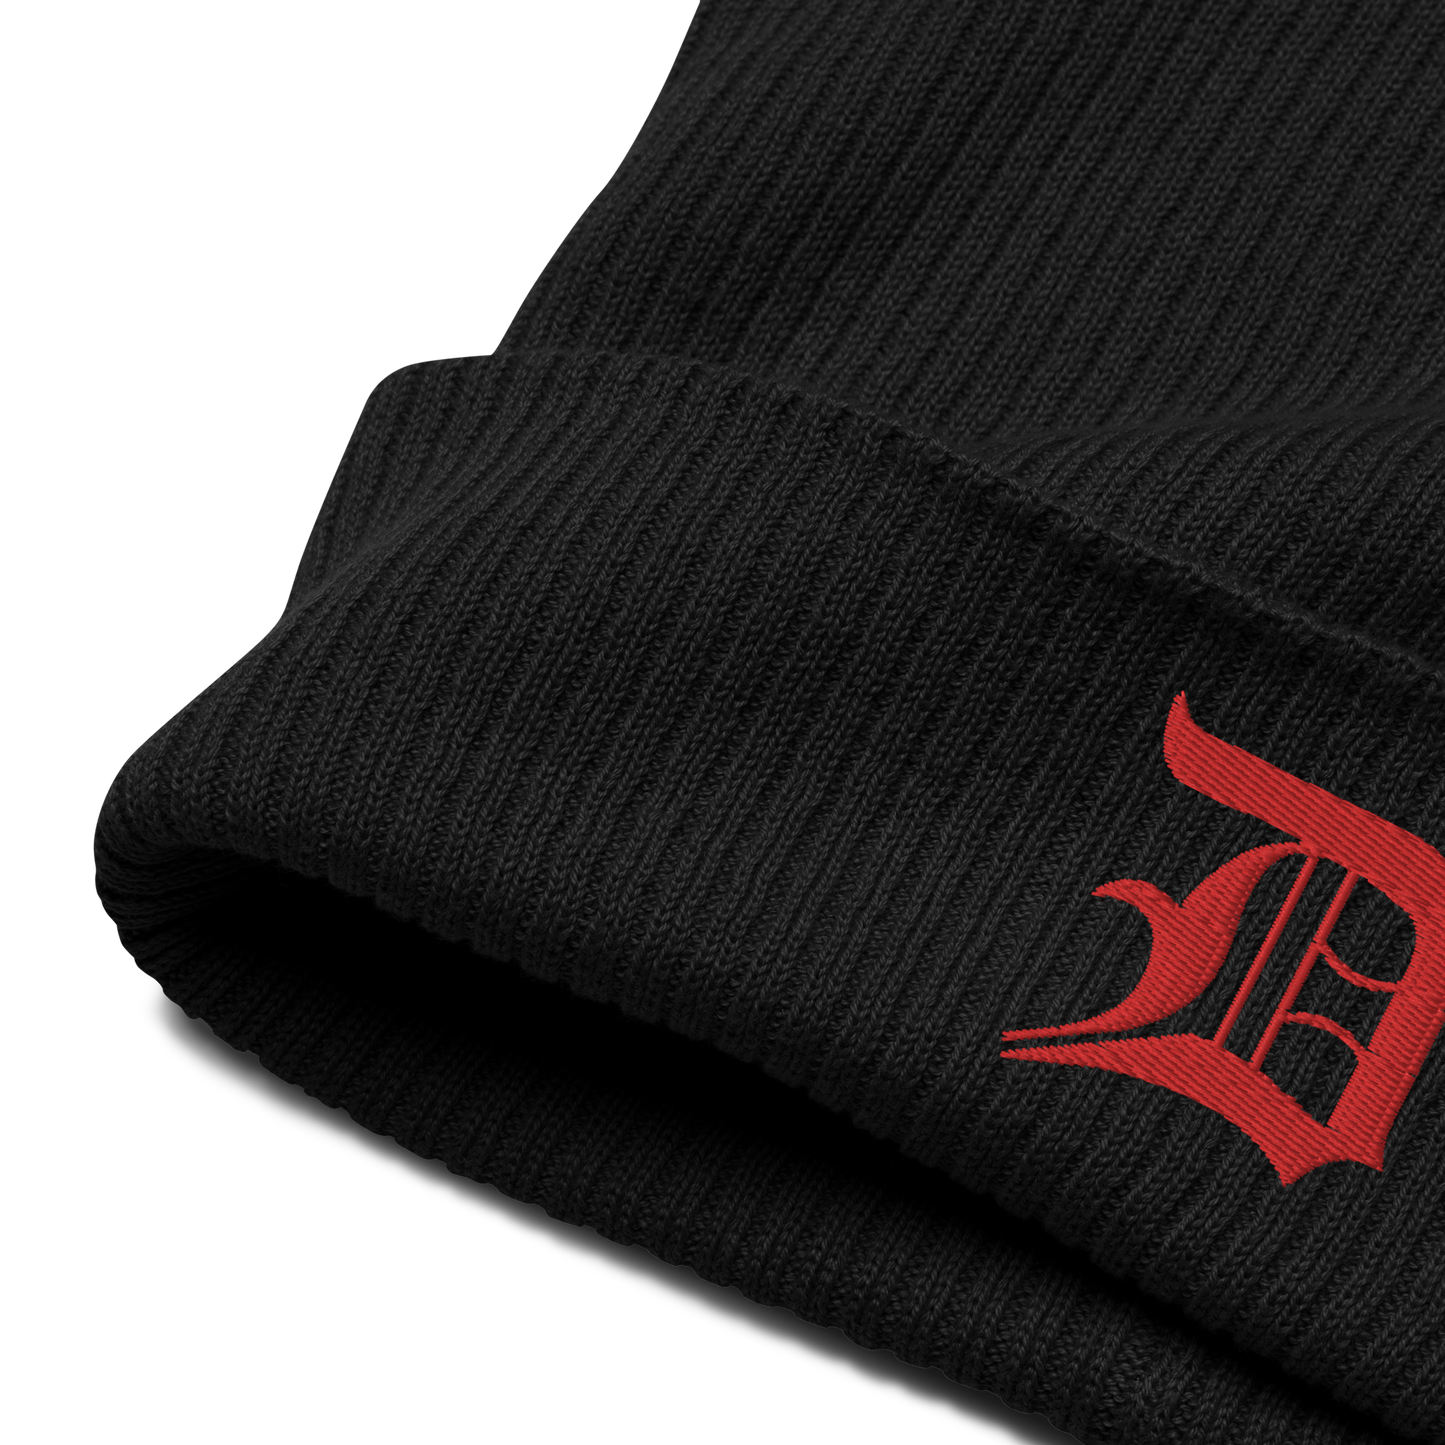 Detroit 'Old English D' Organic Beanie (Red)